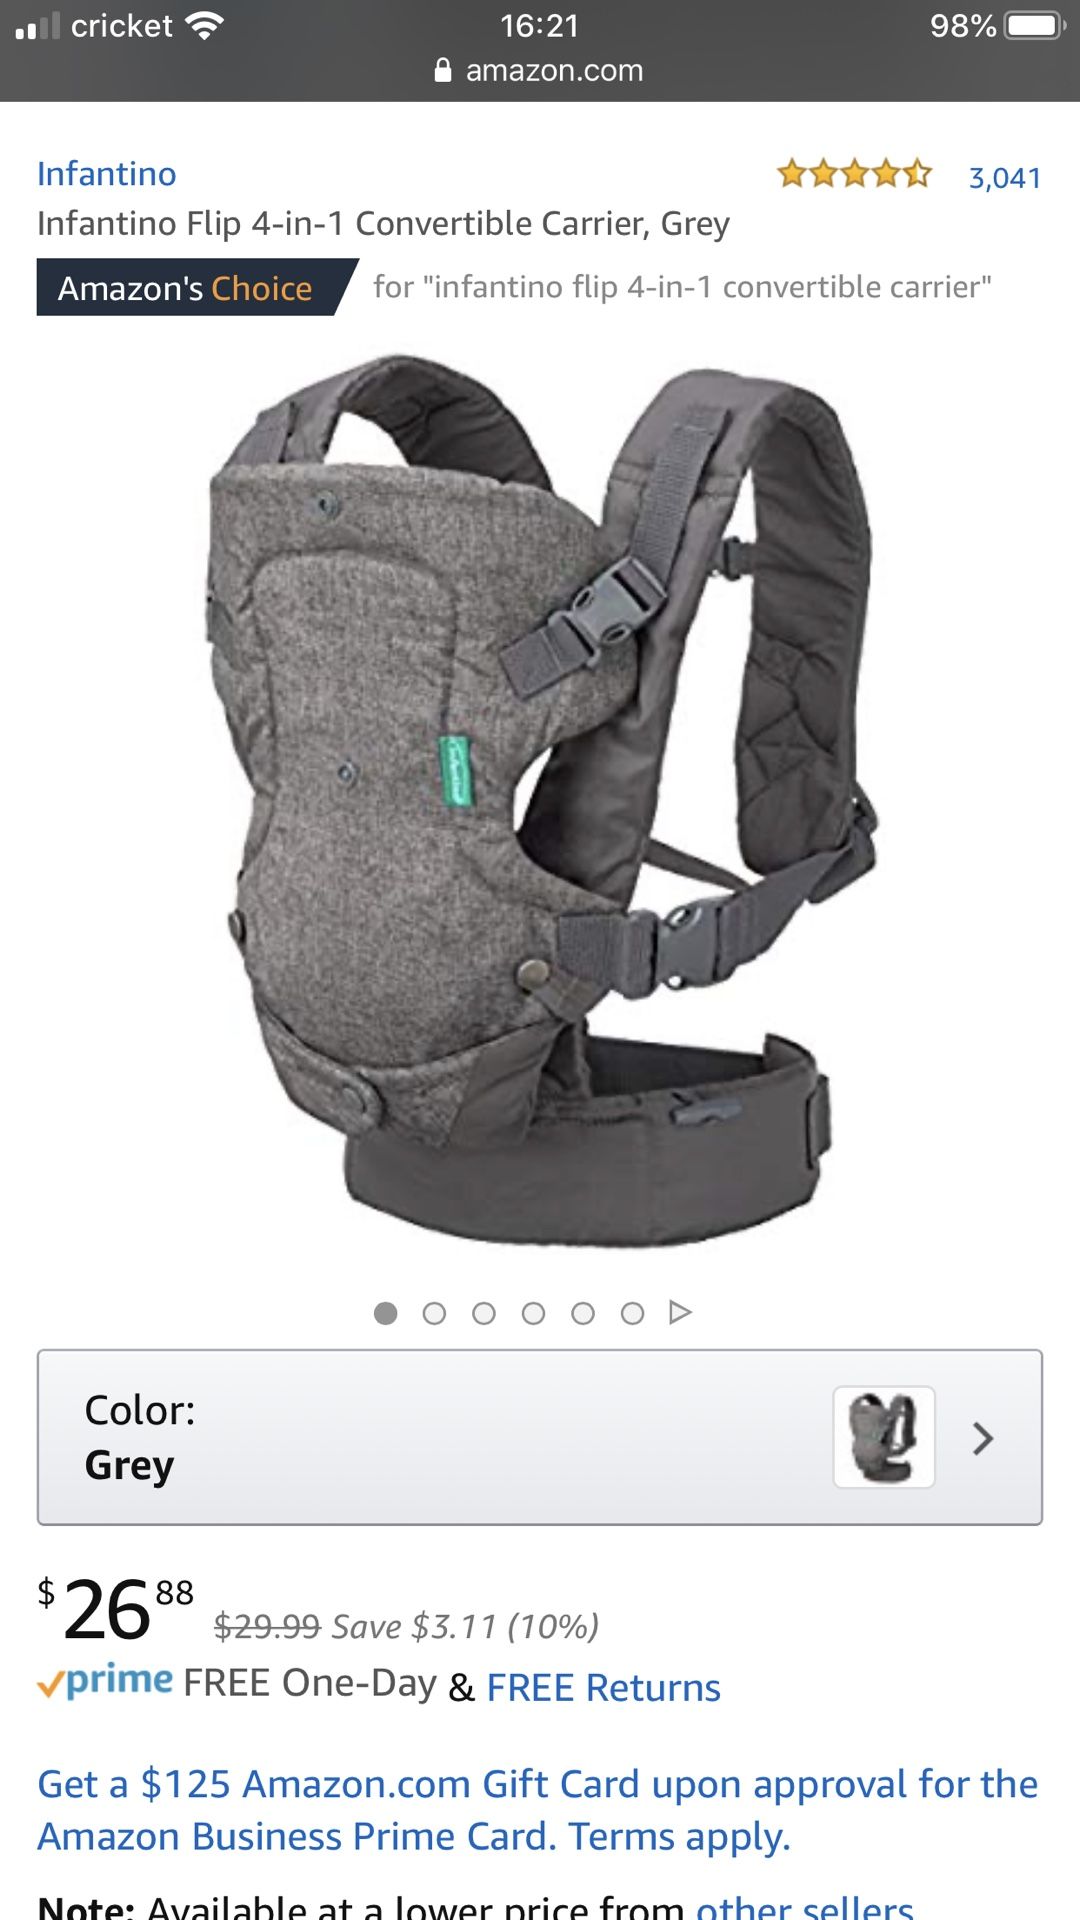 *NEW* Infantino Flip 4-in-1 Convertible Baby Carrier, Grey